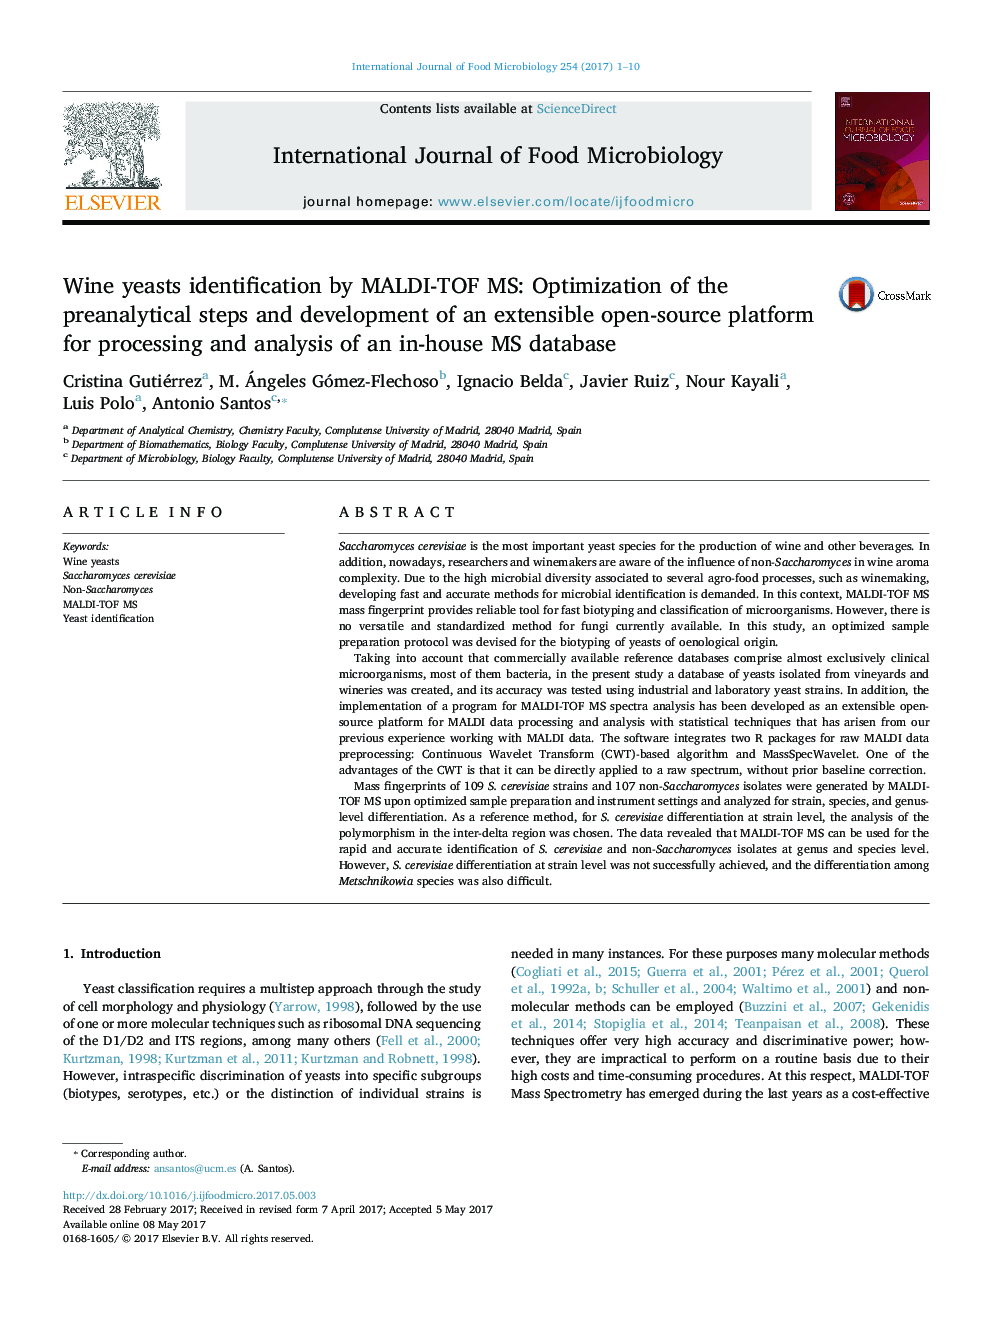 Wine yeasts identification by MALDI-TOF MS: Optimization of the preanalytical steps and development of an extensible open-source platform for processing and analysis of an in-house MS database